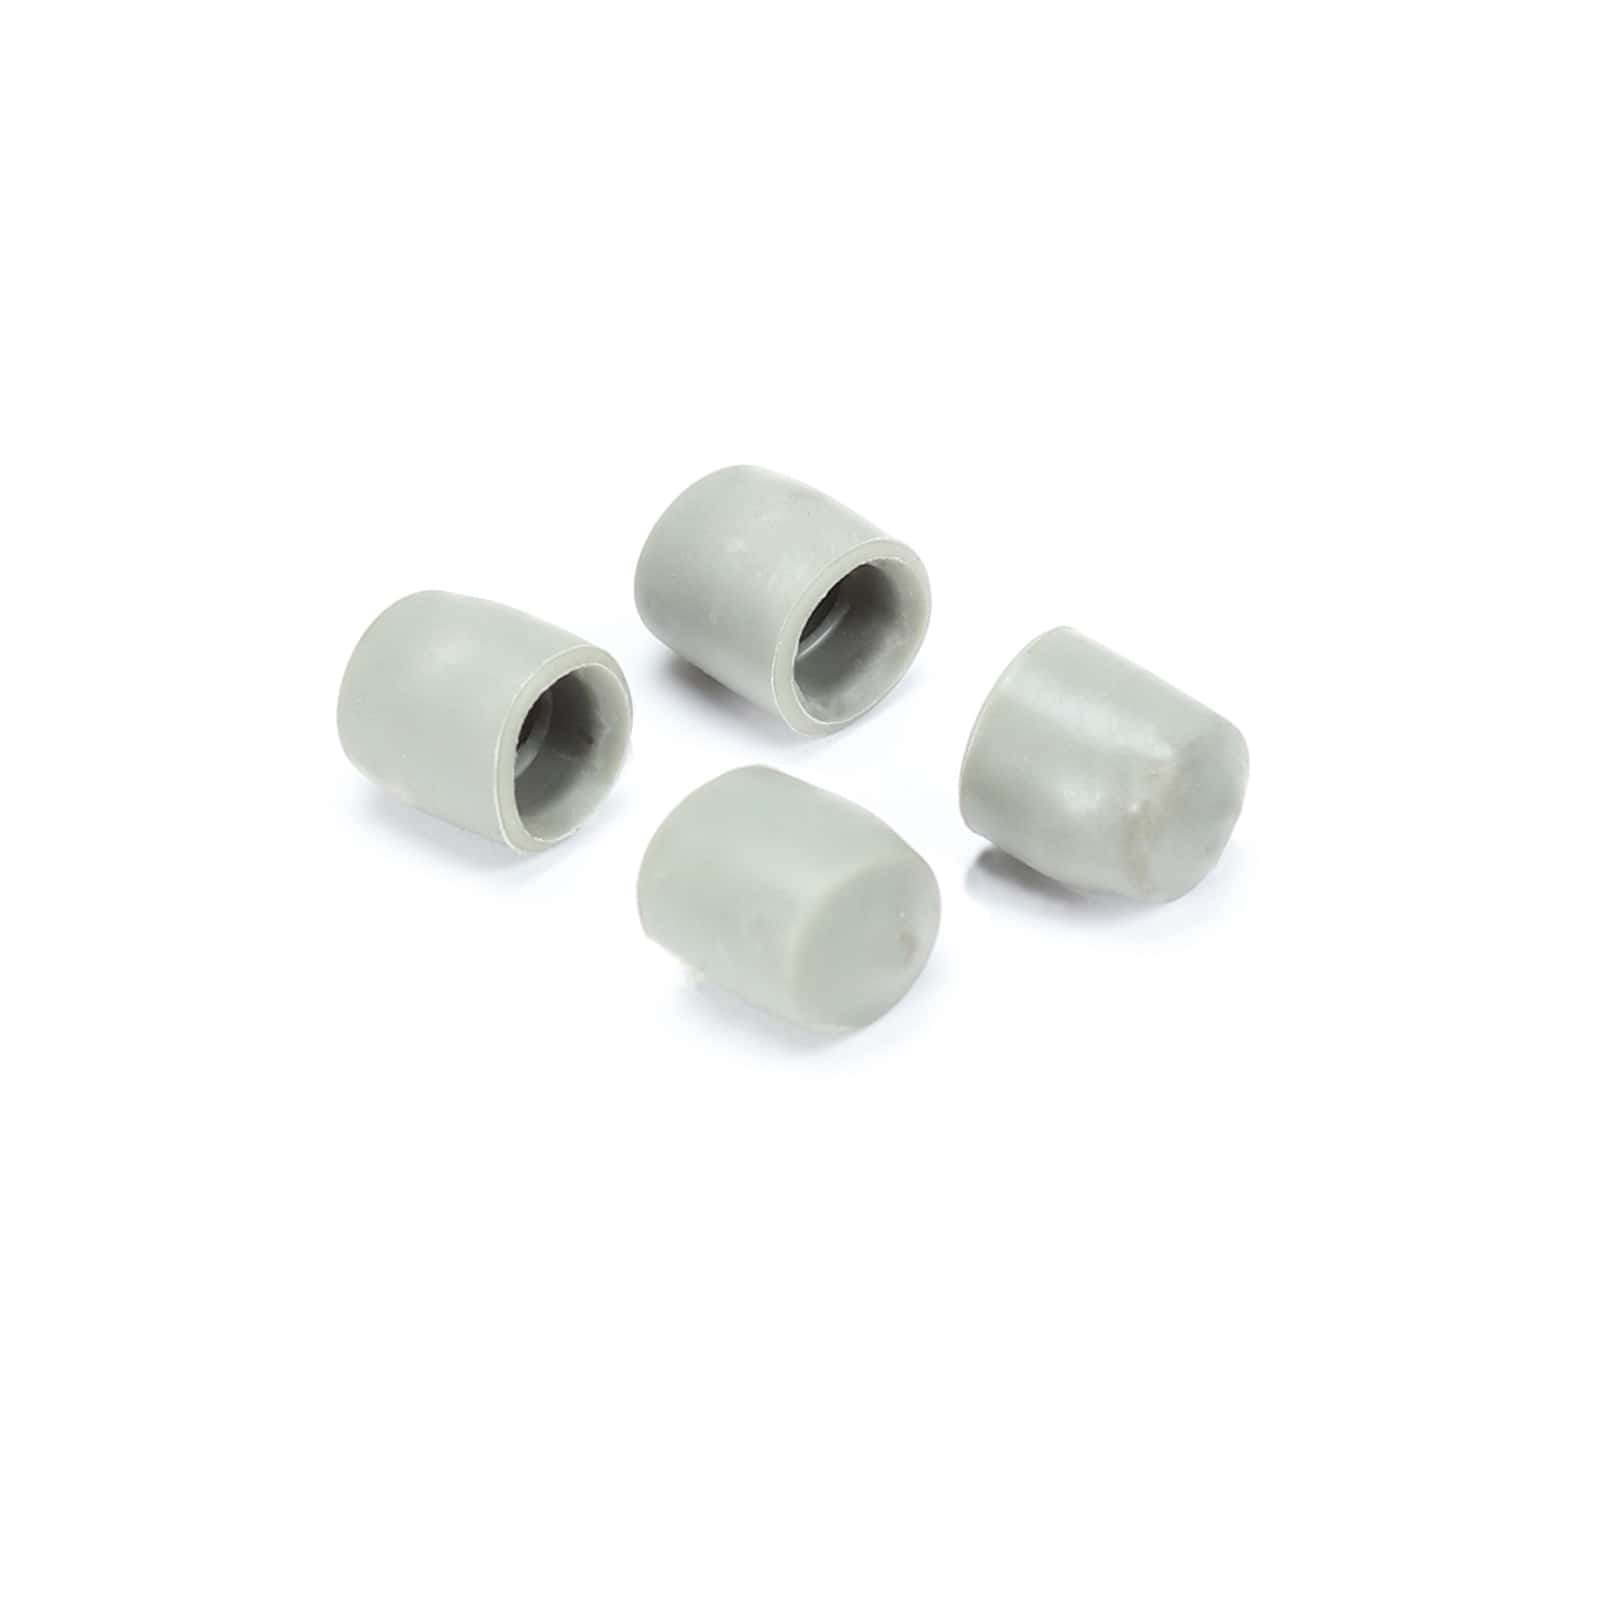 ROGERS DRUMS 4723RT GREY RUBBER SNARE RAIL TIPS